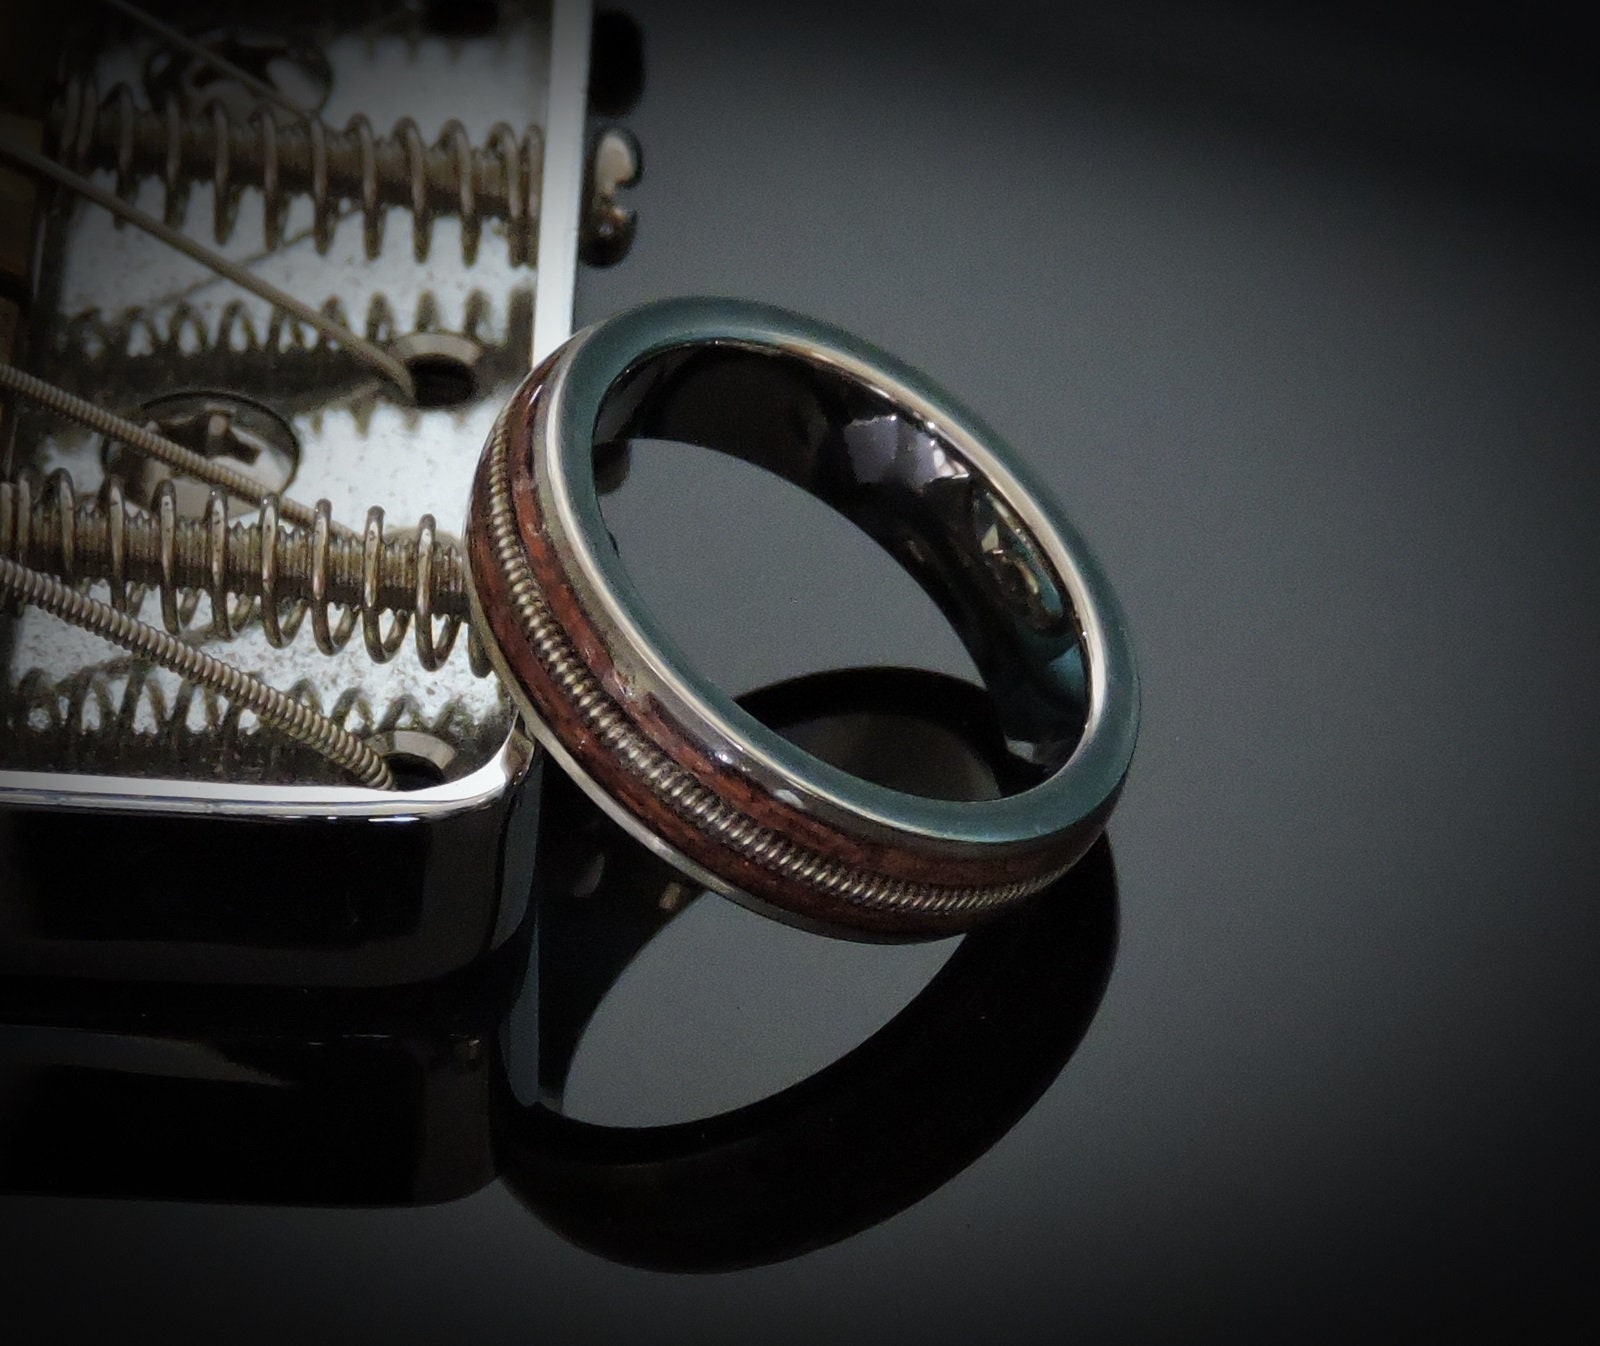 Titanium Wood Ring with Acacia Wood 9mm / 5-14 whole-half-quarter-available-enter in Notes During Checkout